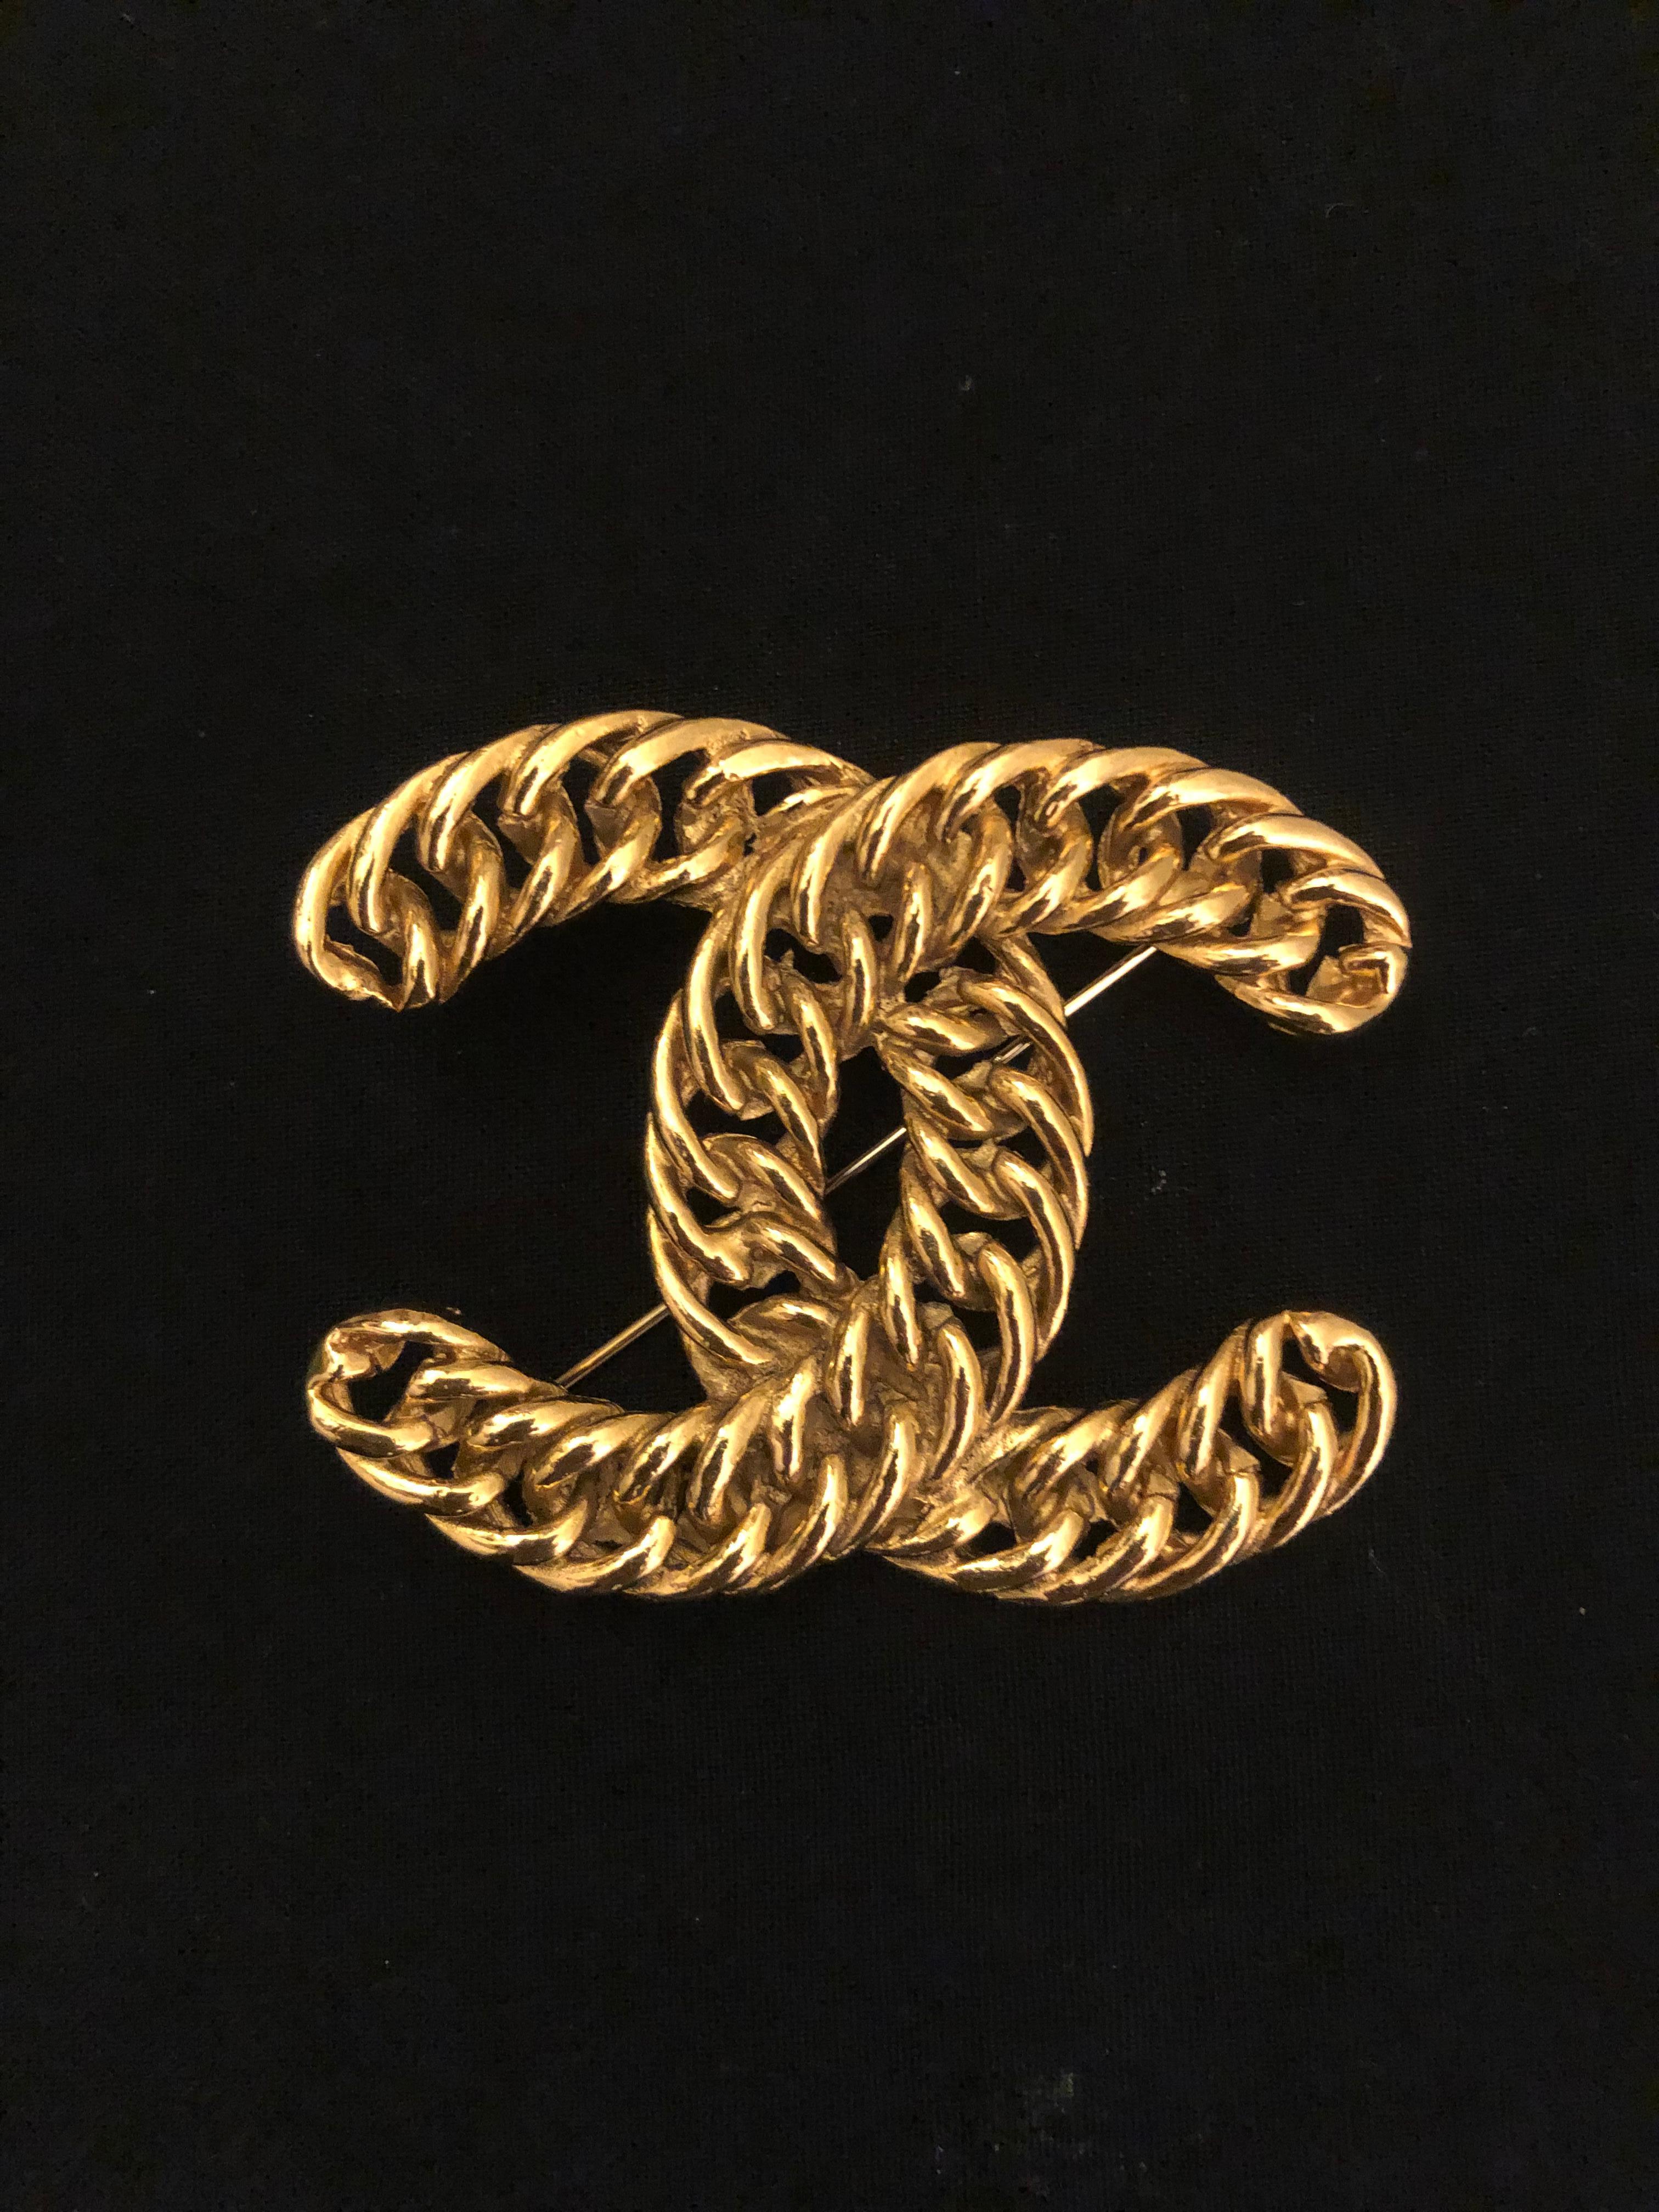 1980s CHANEL iconic massive gold toned brooch in intertwined chain CC logo. Stamped 1107. Measures approximately 6.6 x 5.3 cm.

Condition: Minor signs of wear. Generally in very good condition.